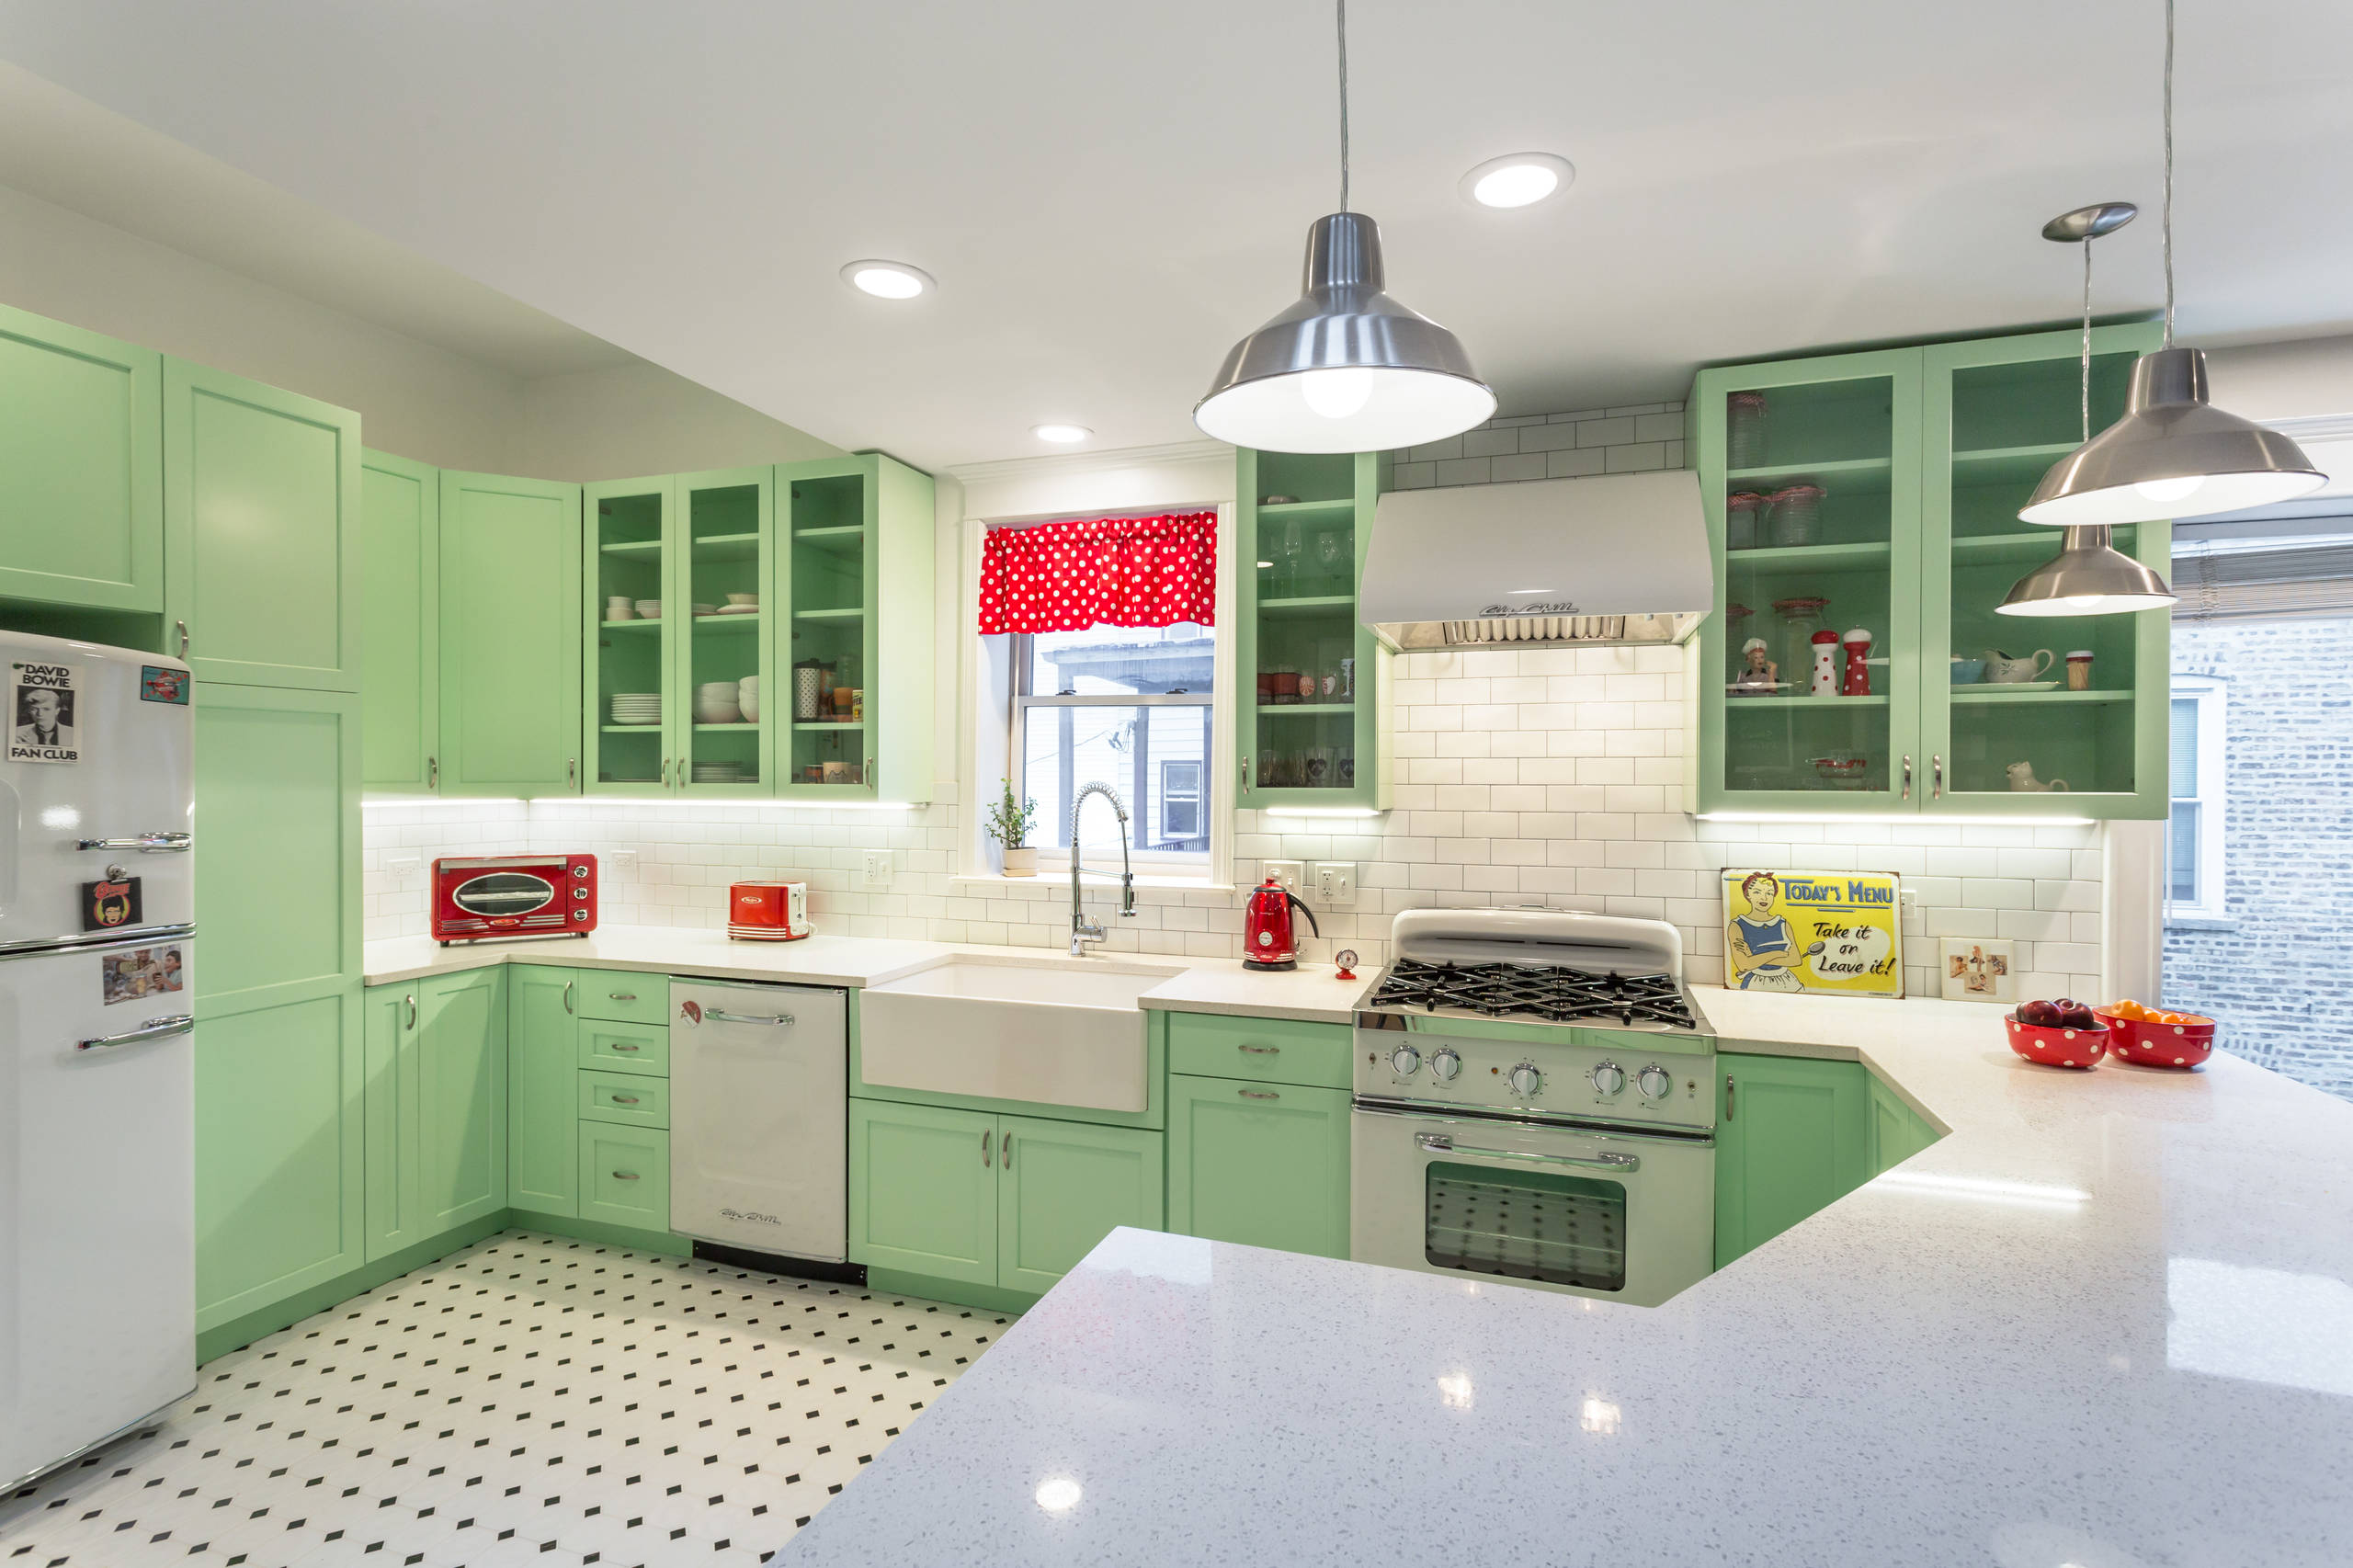 https://st.hzcdn.com/simgs/pictures/kitchens/retro-kitchen-remodel-in-humboldt-park-chicago-chi-renovation-and-design-img~7be1518c06fdc444_14-7135-1-8c2ccd2.jpg